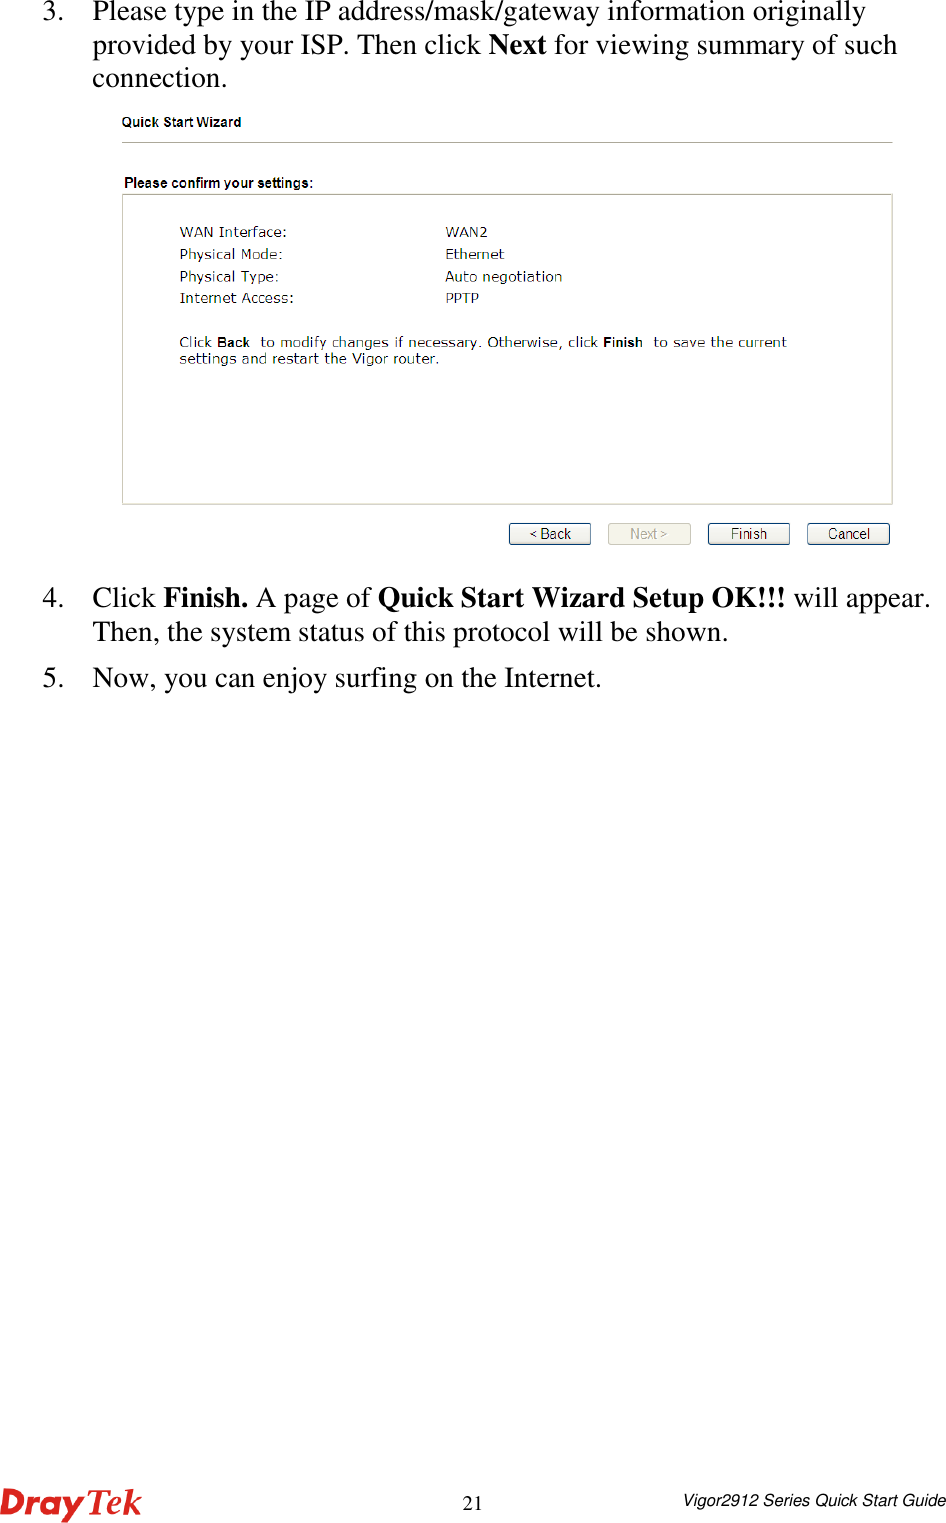  Vigor2912 Series Quick Start Guide 213. Please type in the IP address/mask/gateway information originally provided by your ISP. Then click Next for viewing summary of such connection.    4. Click Finish. A page of Quick Start Wizard Setup OK!!! will appear. Then, the system status of this protocol will be shown. 5. Now, you can enjoy surfing on the Internet. 